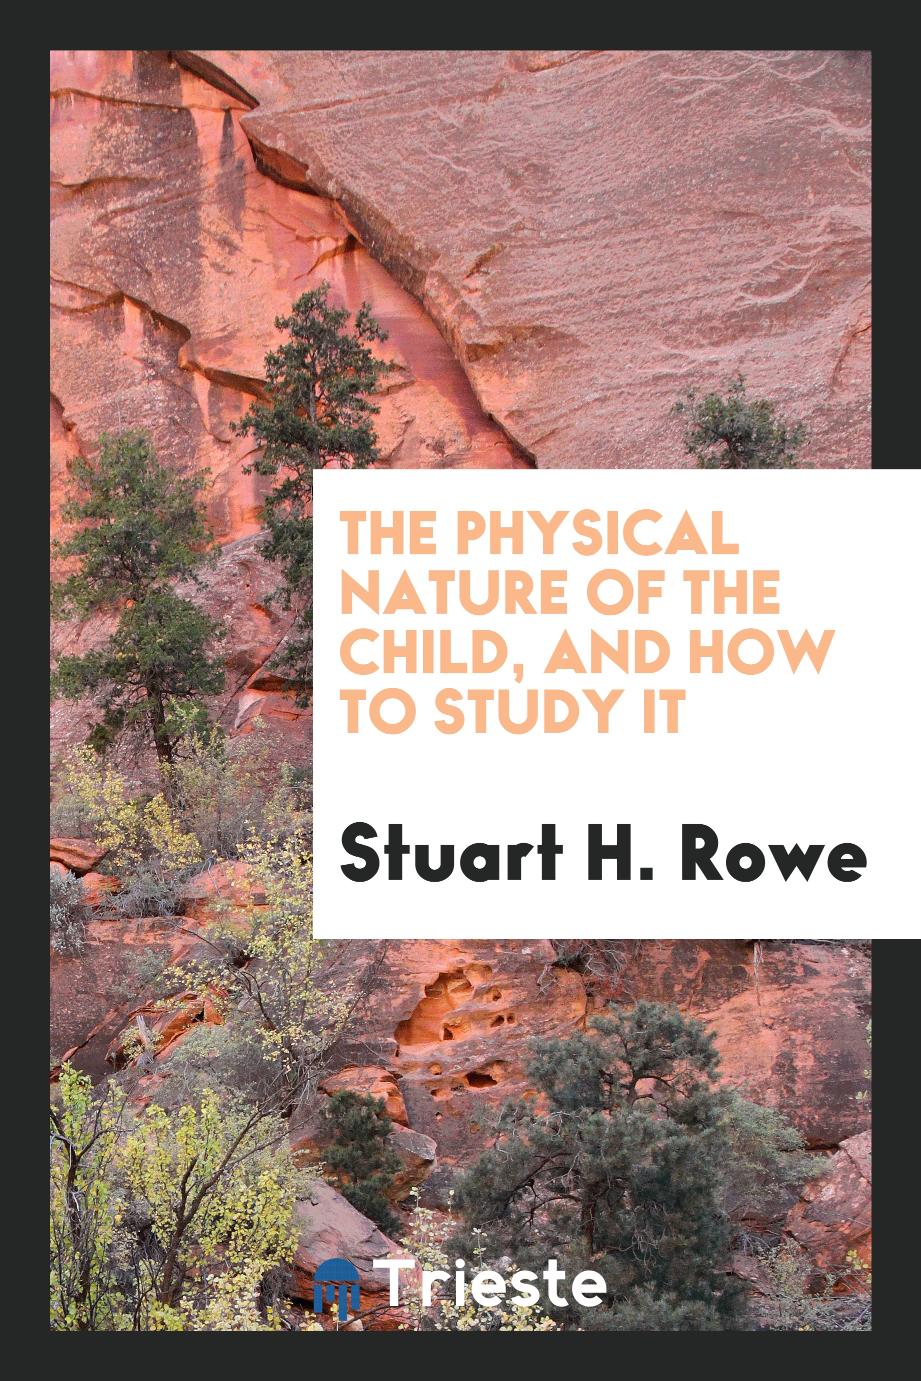 The physical nature of the child, and how to study it